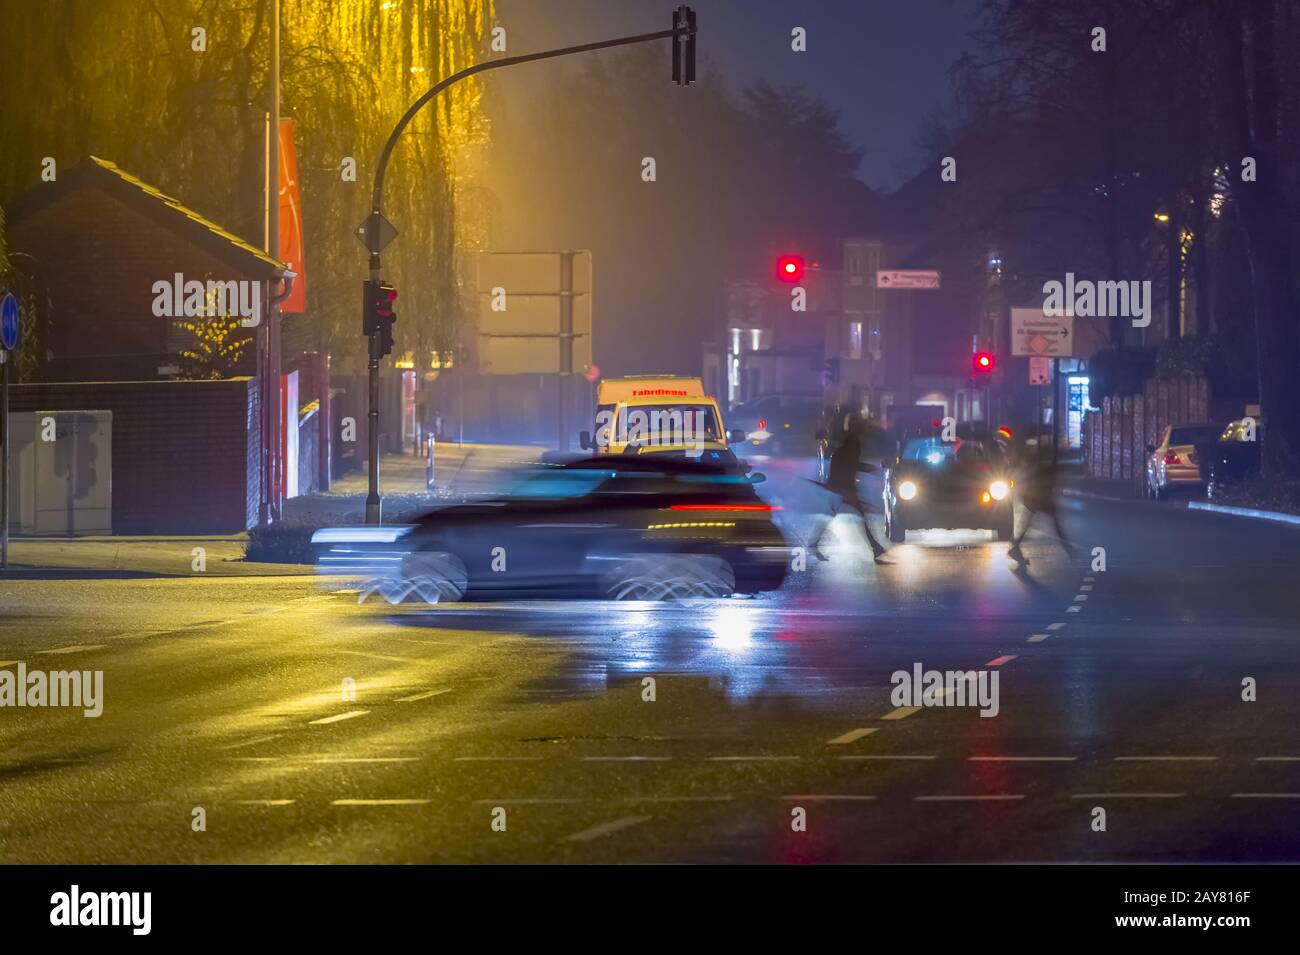 Road traffic on an intersection at night. Stock Photo